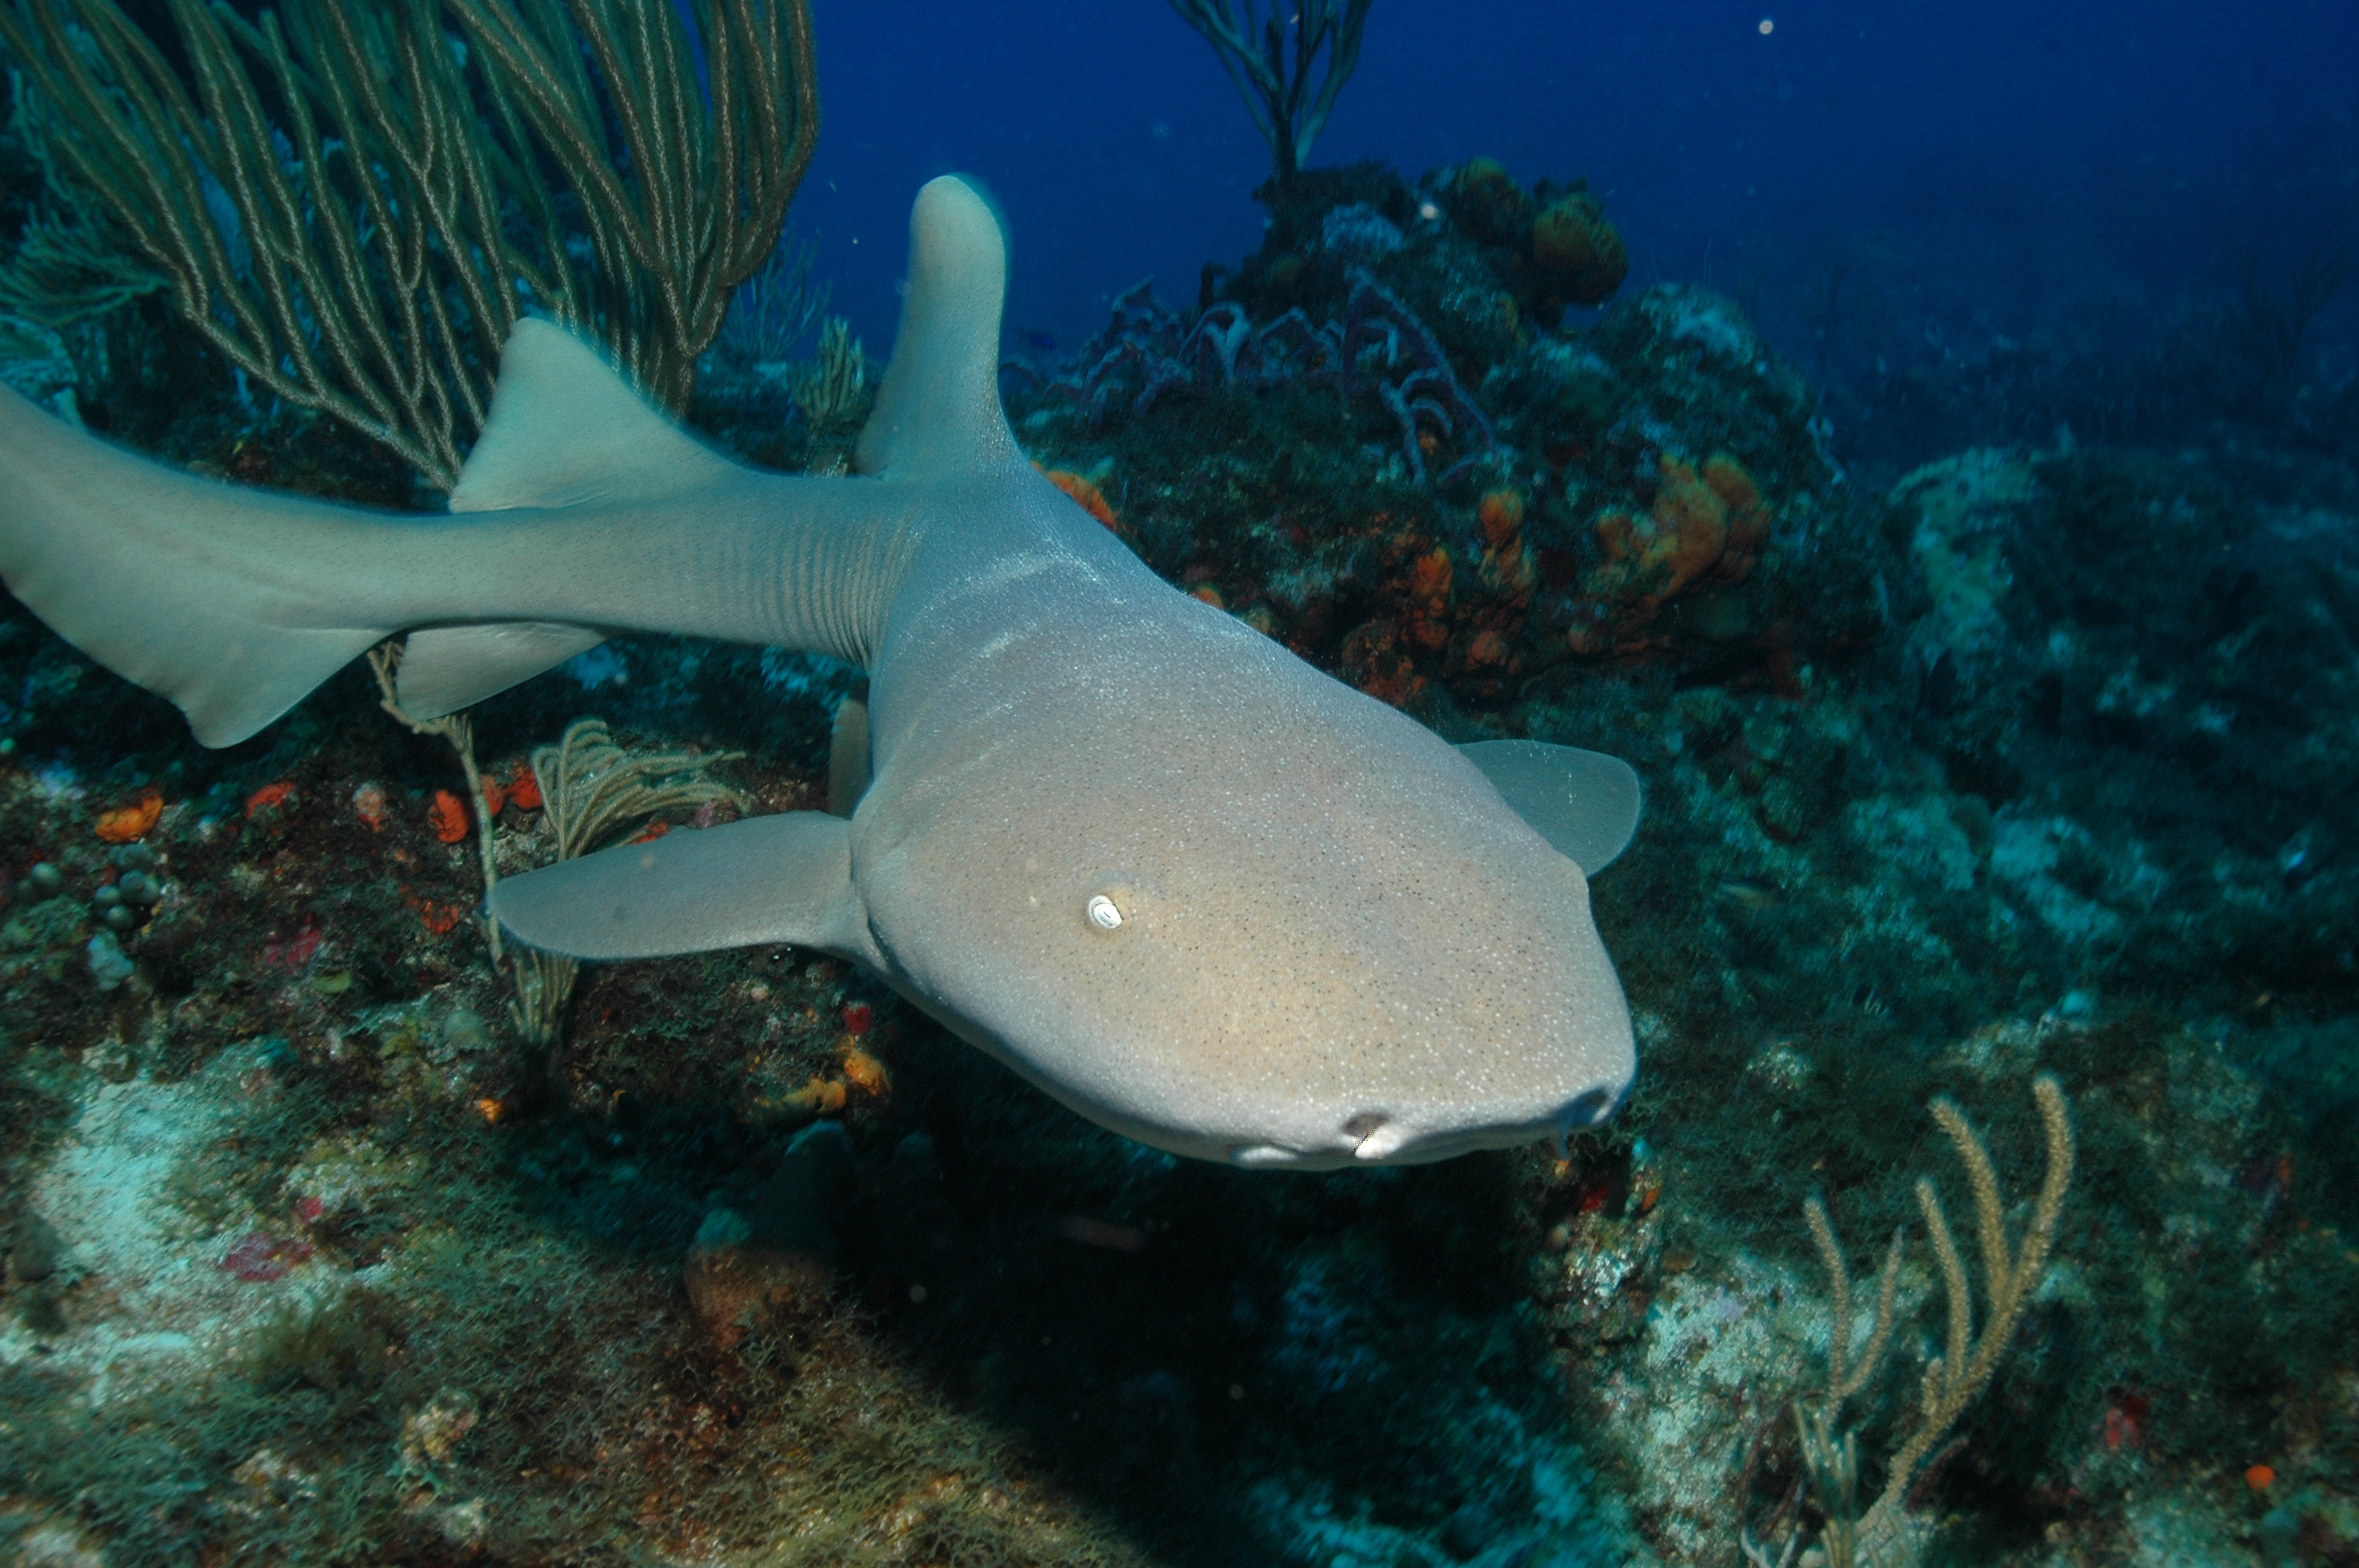 Sombrero Reef dive site is home to nurse sharks that benefit from the nutrient rick waters of the Florida Keys